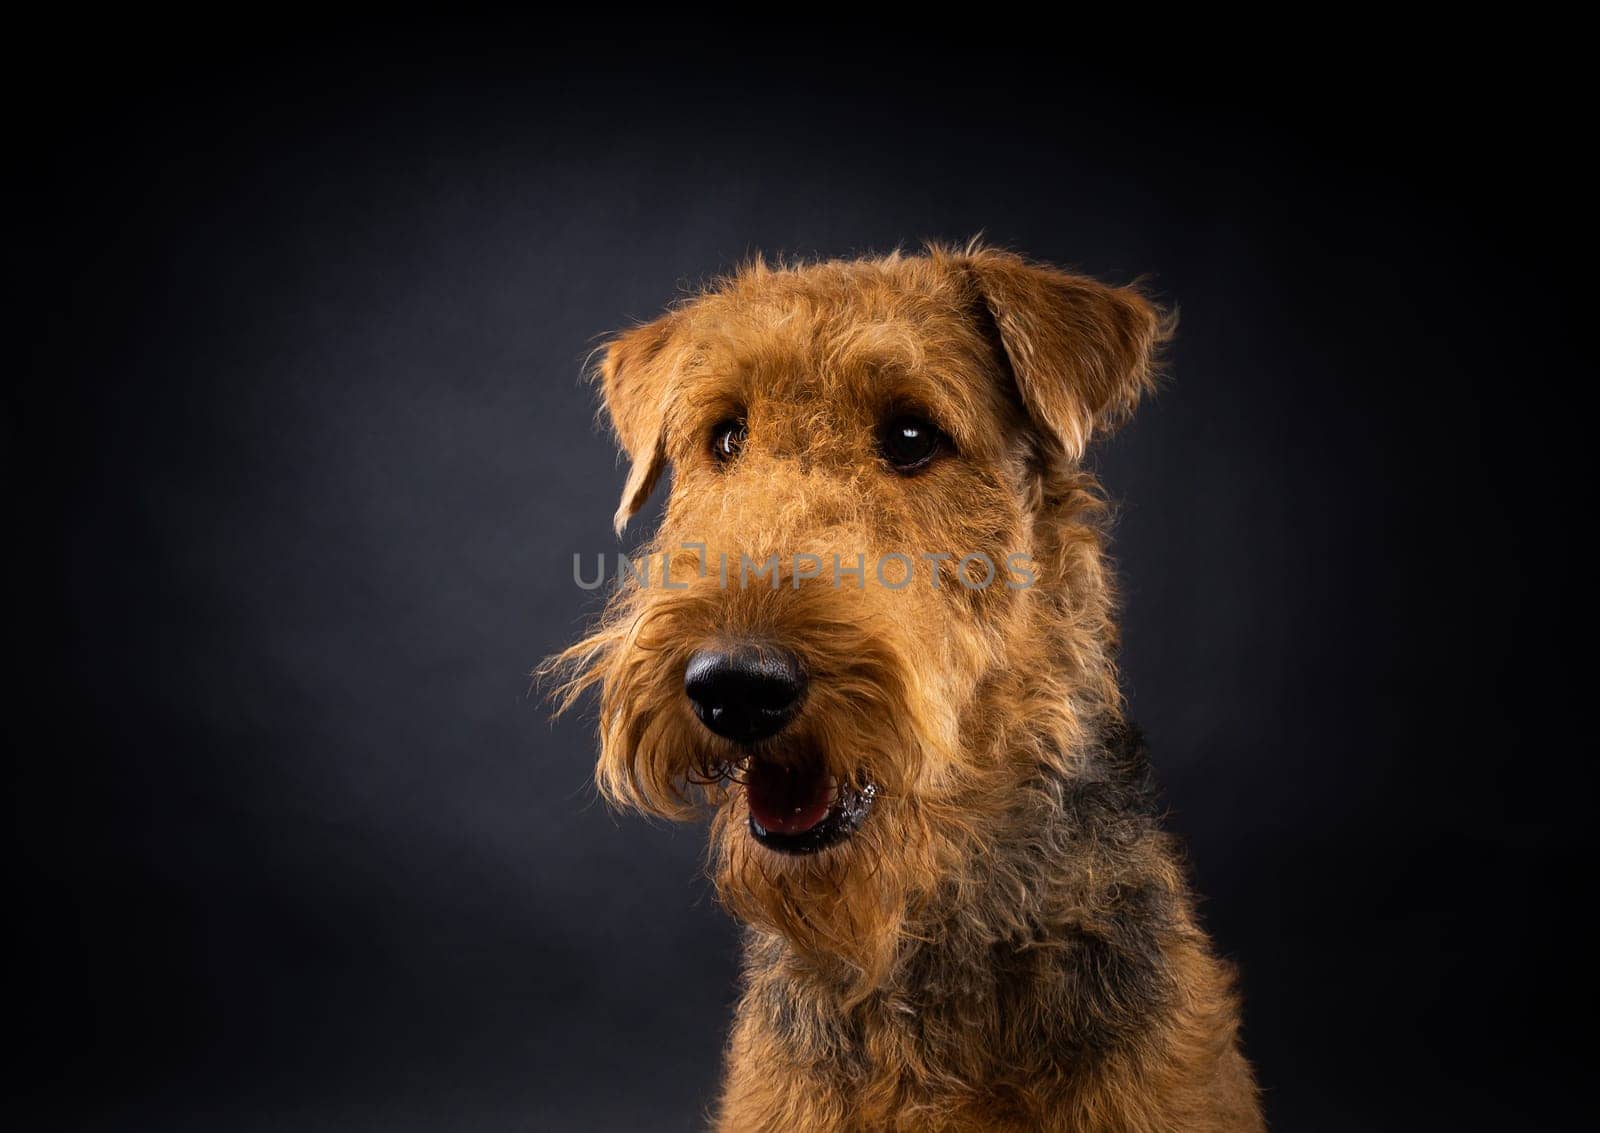 Portrait of an Airedale Terrier in close-up. Shot on a black background in a photo studio.